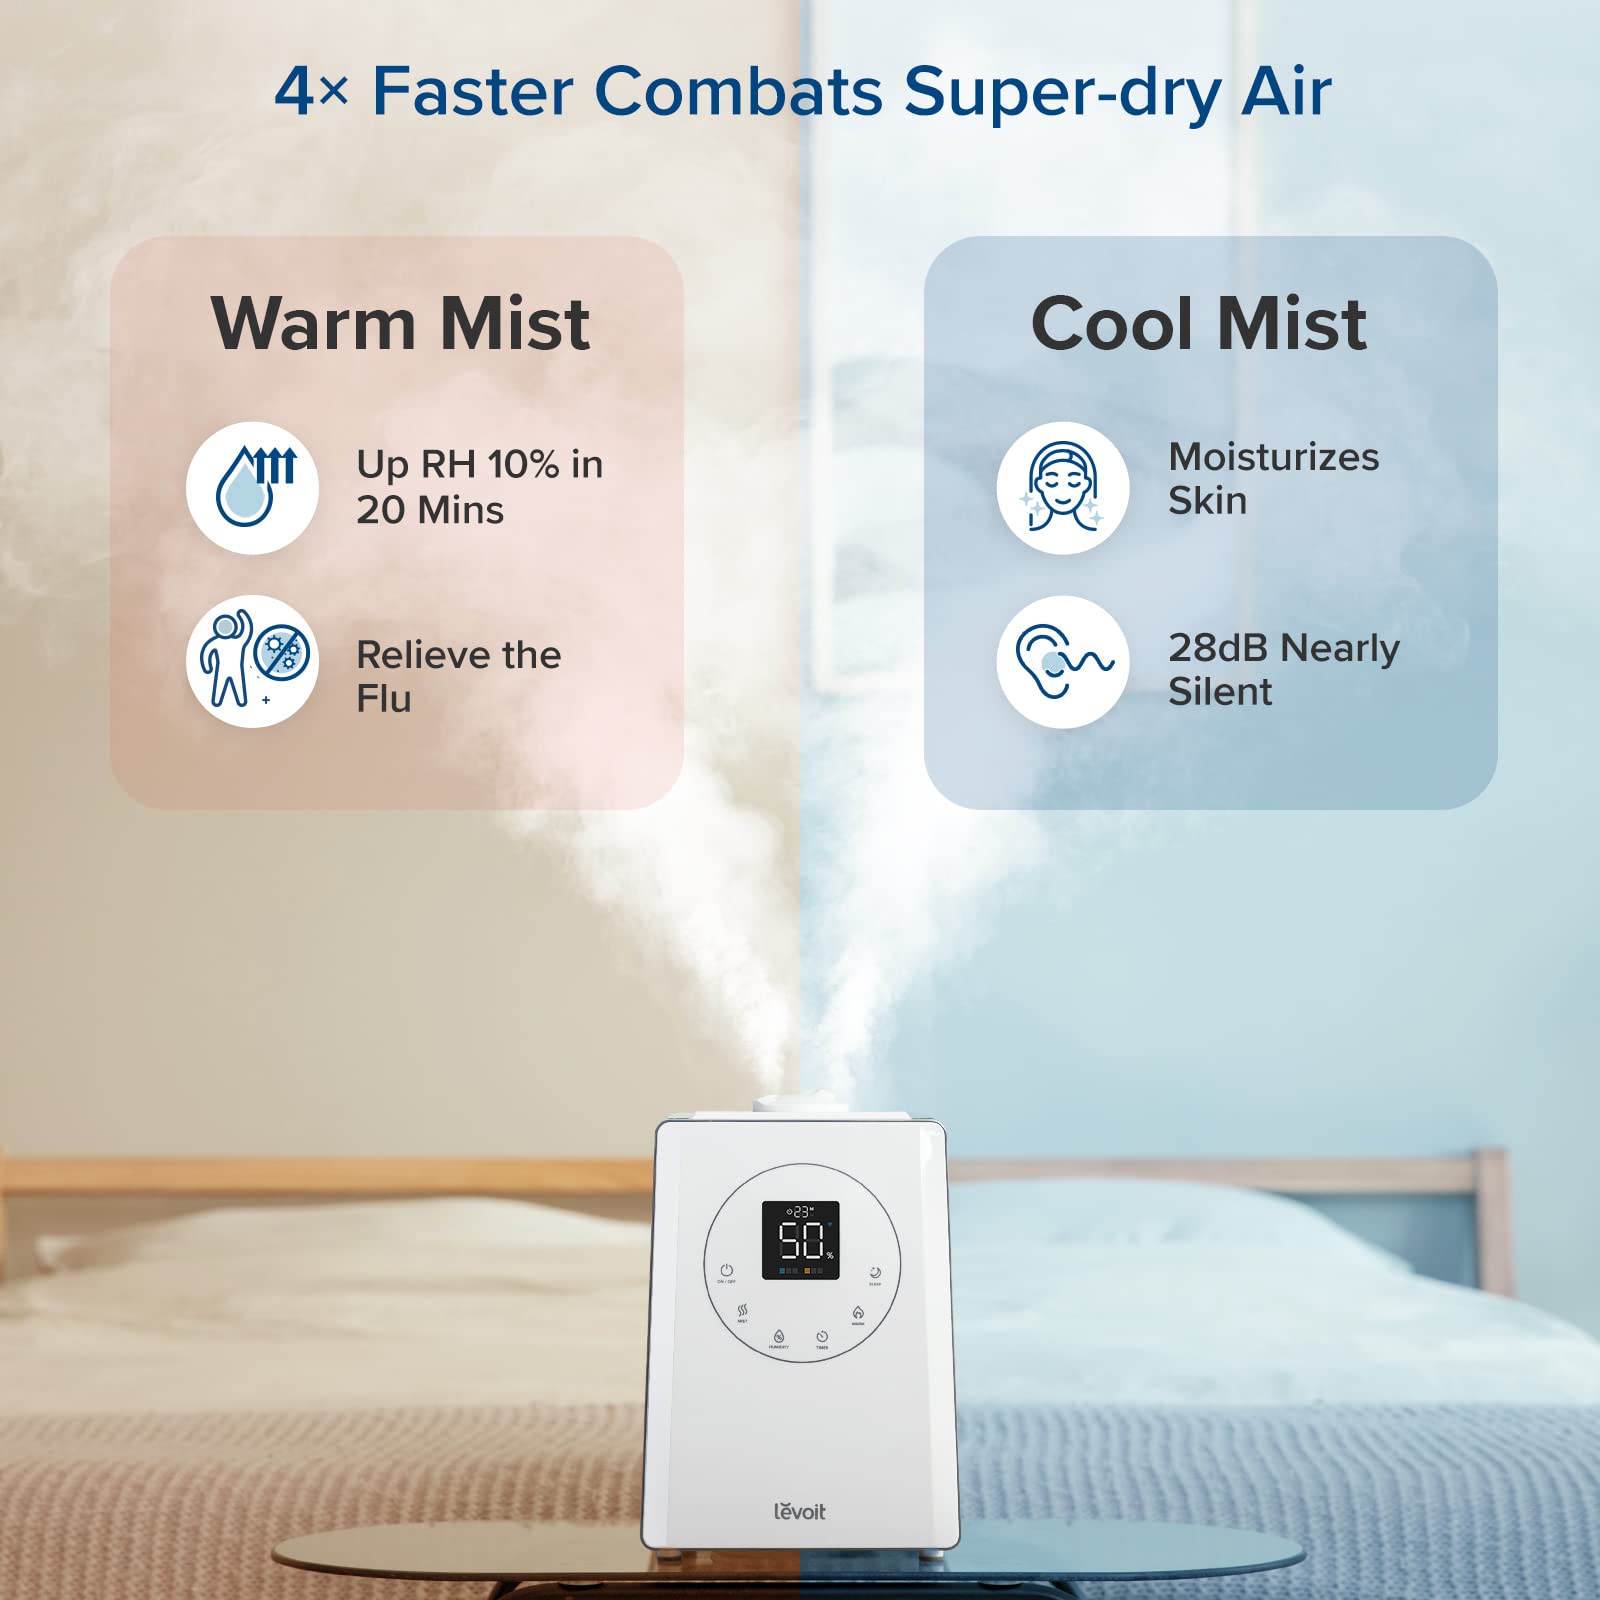 LEVOIT LV600S Smart Warm and Cool Mist Humidifiers for Home Bedroom Large Room, (6L) Air Vaporizer Quickly Humidify Whole House up to 753 sq. ft, Easy Top Fill, App & Voice Control - Quiet Sleep Mode